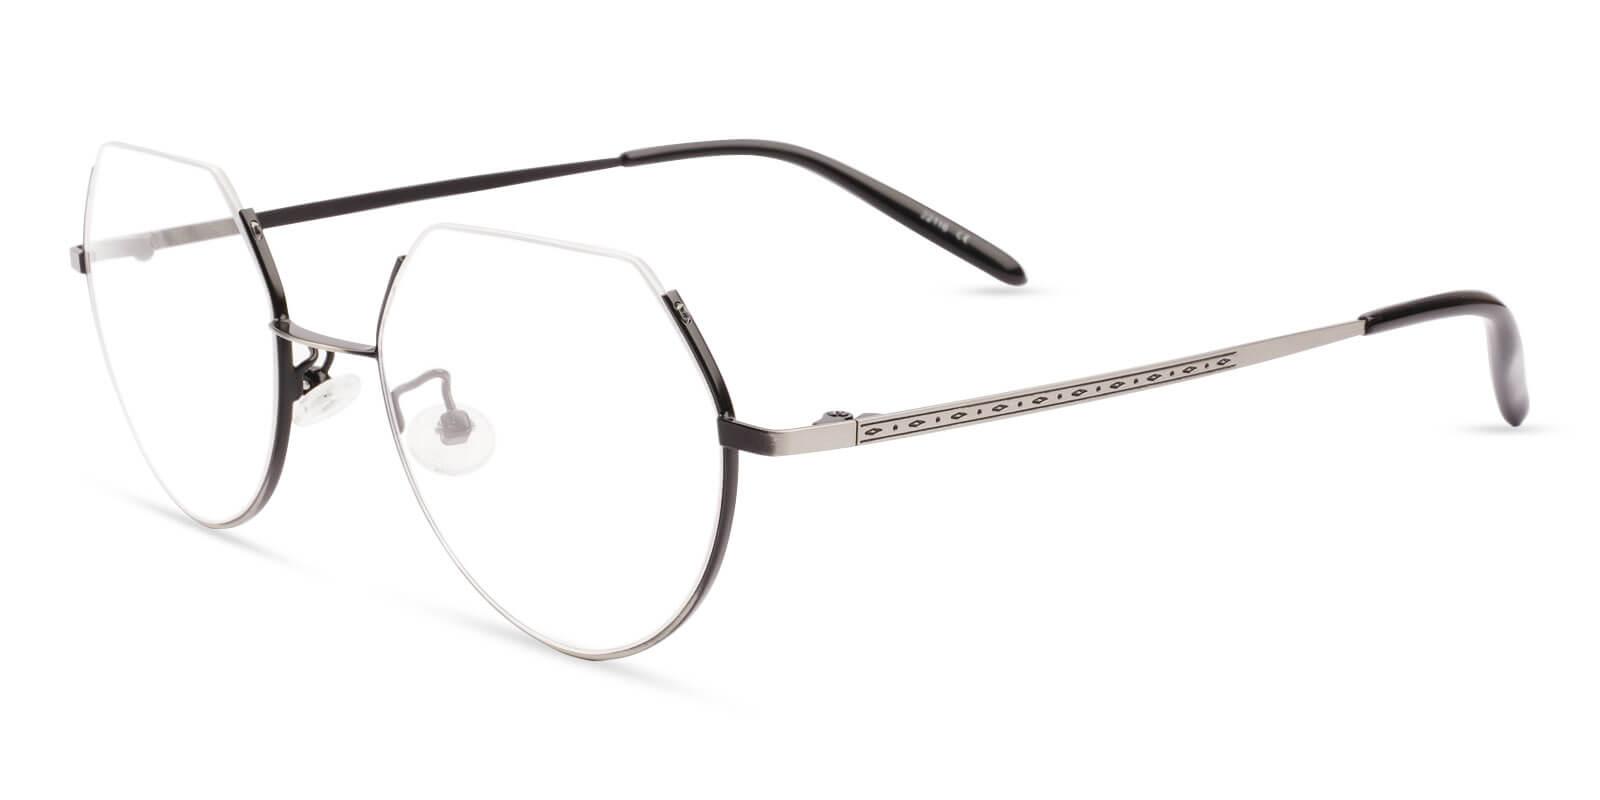 Indonesia Silver Metal Eyeglasses , Lightweight , NosePads Frames from ABBE Glasses